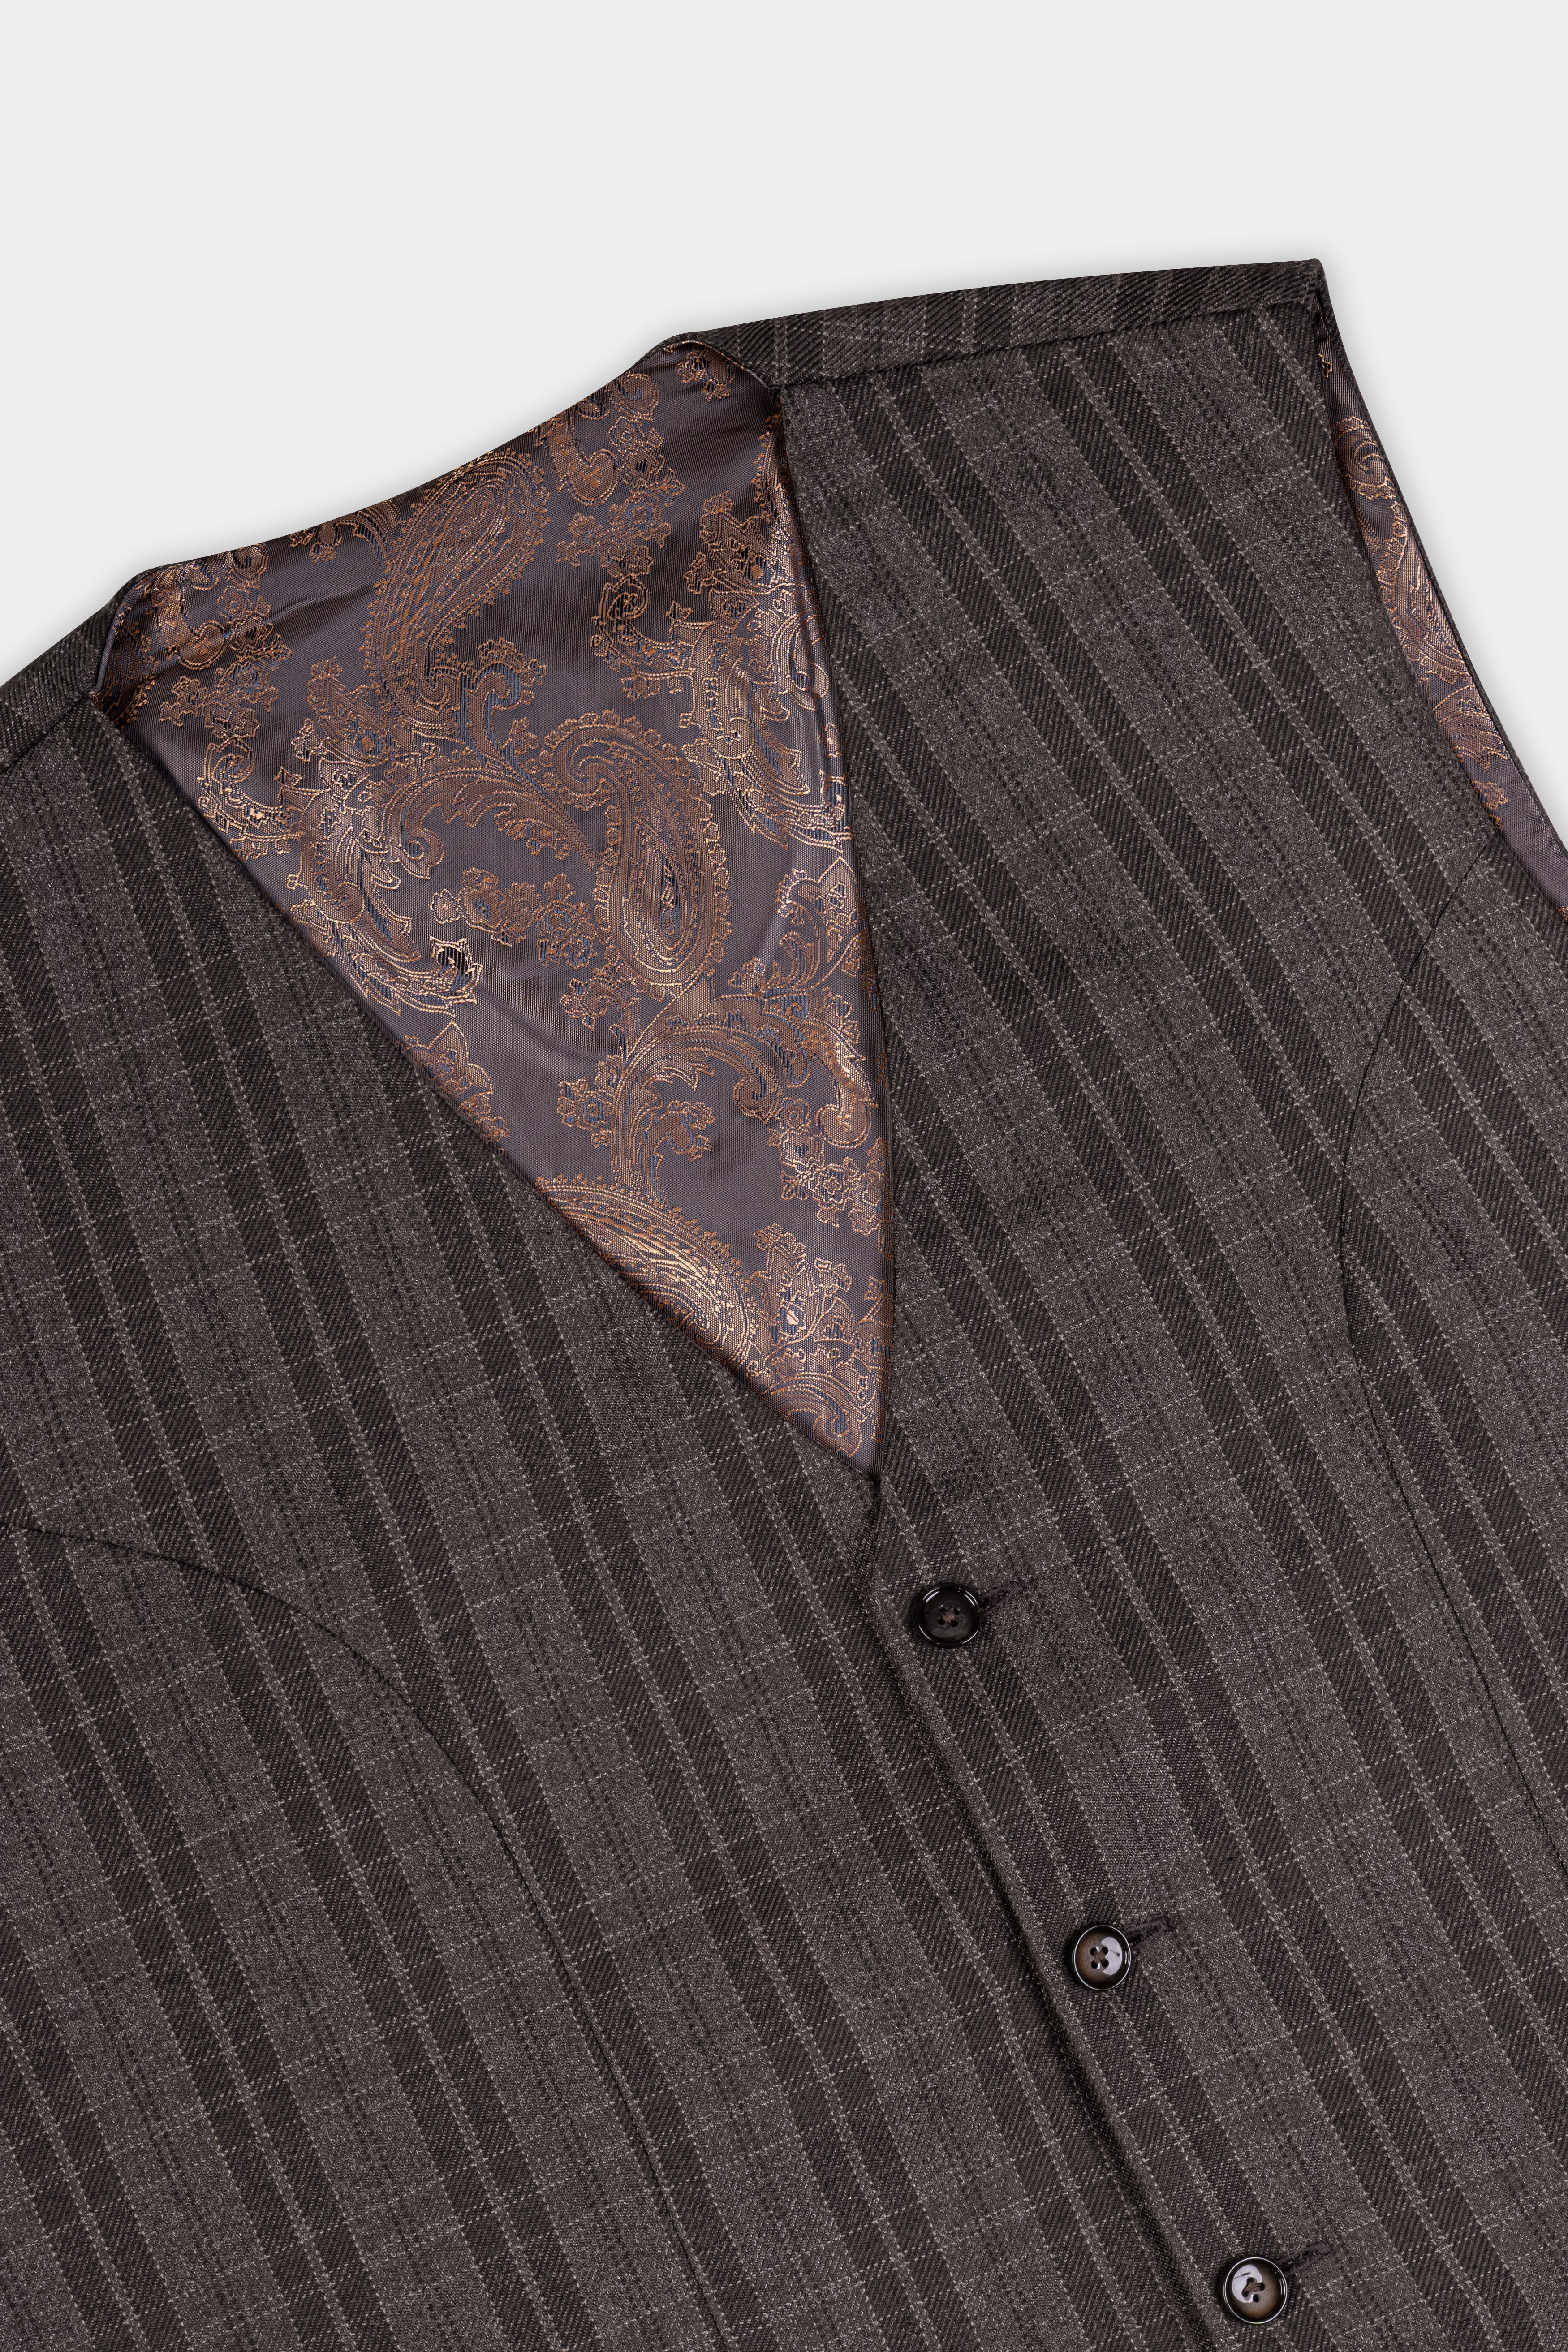 Thunder Brown Plaid Tweed Double Breasted Suit